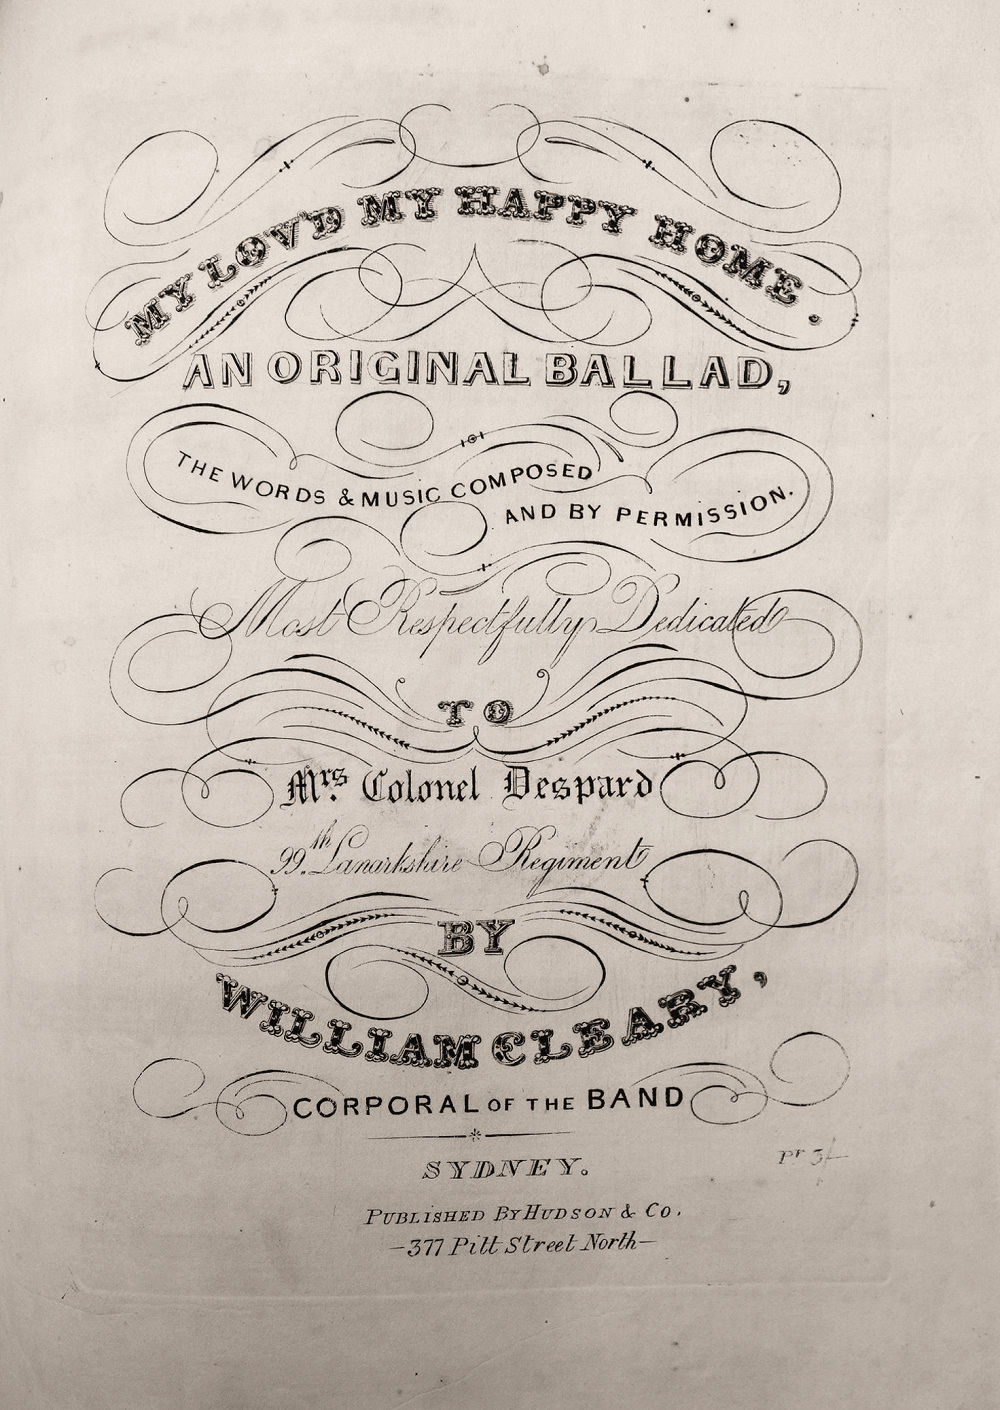 My lov'd my happy home by William Cleary (Sydney: Hudson, [1844], cover)